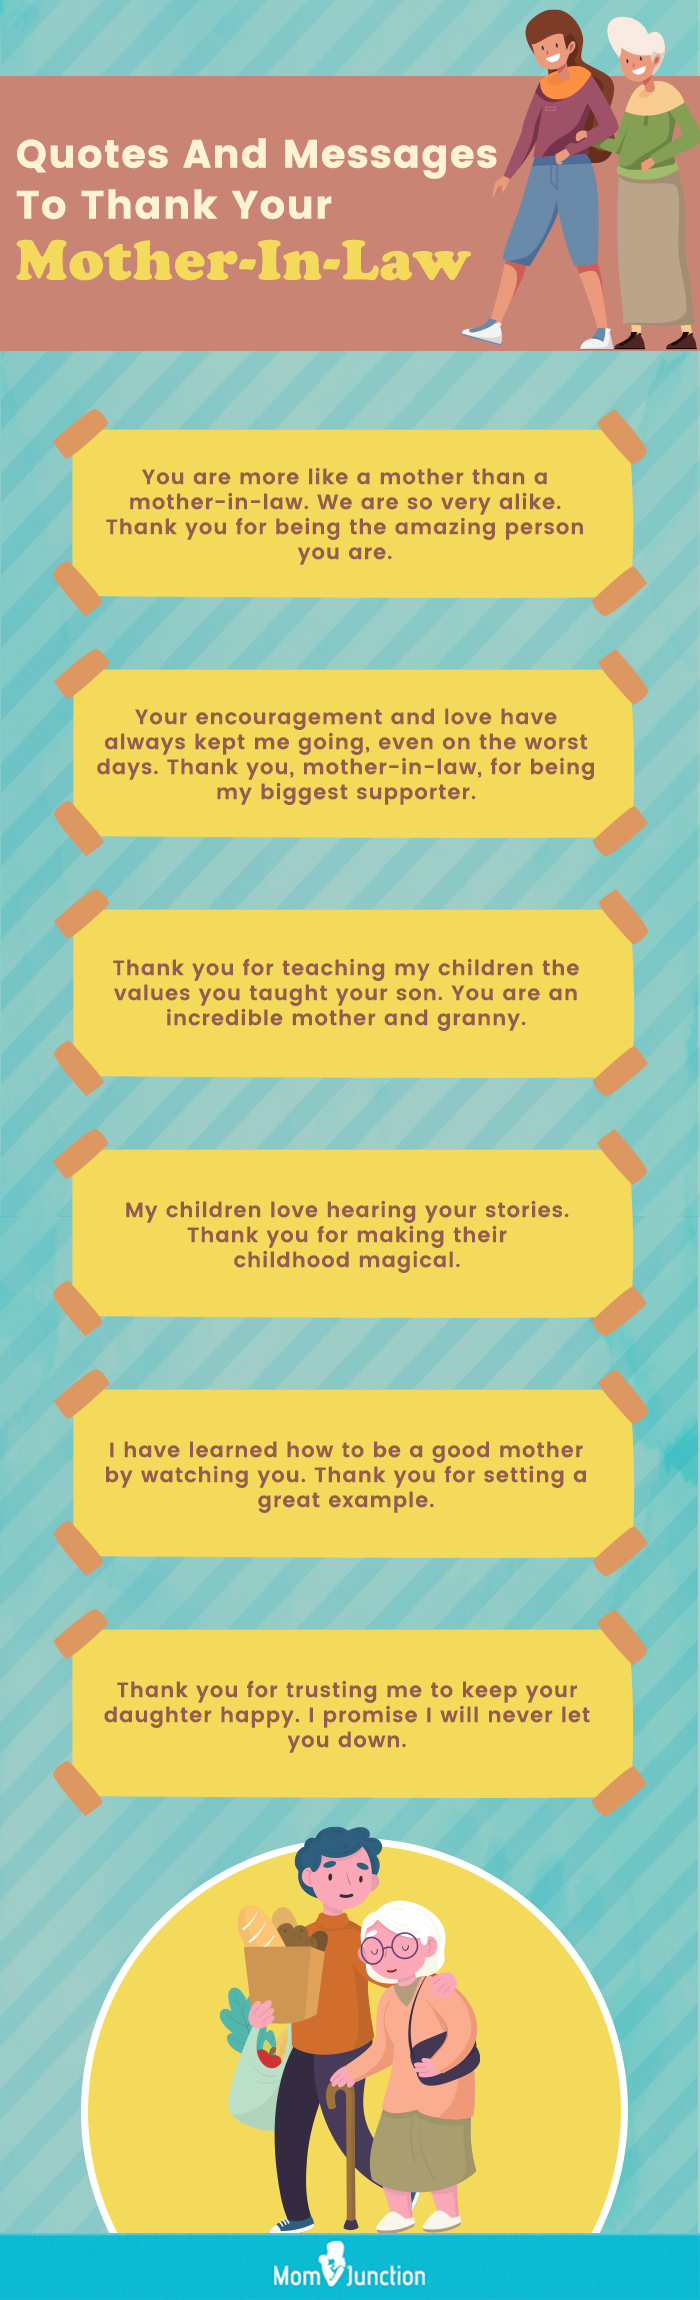 quotes and messages to thank your mother-in-law (infographic)